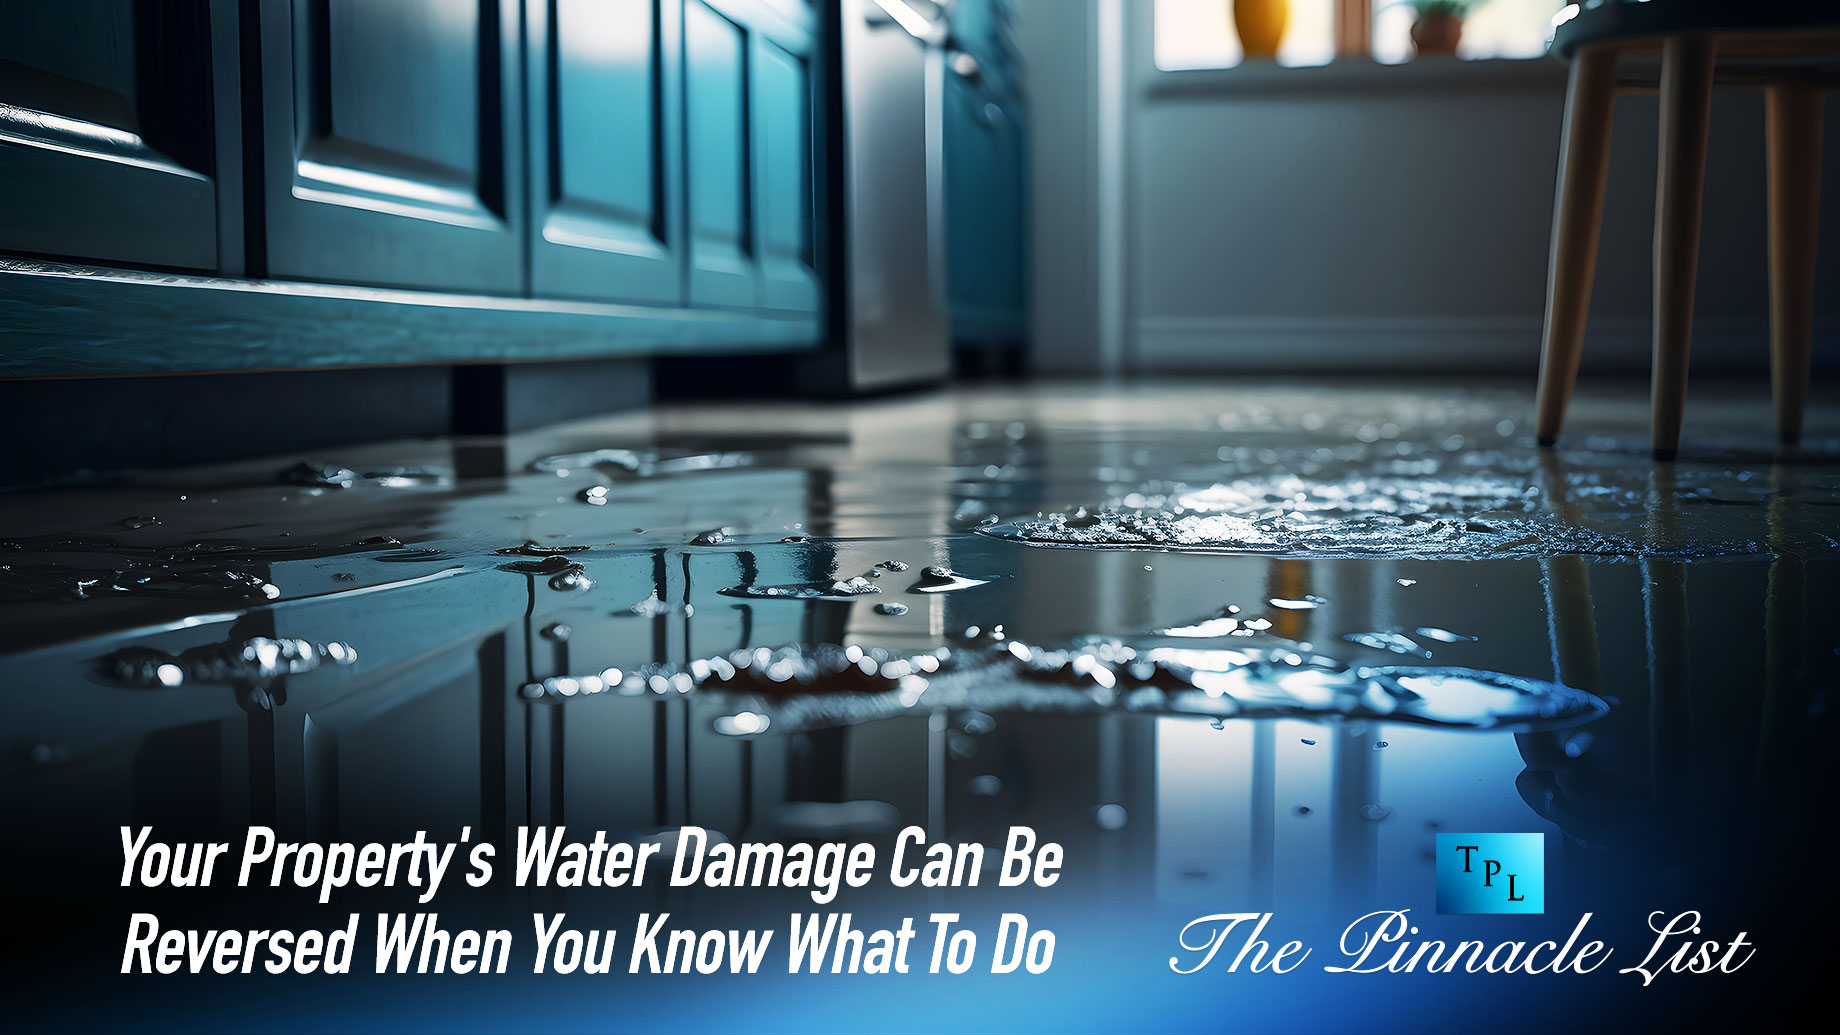 Your Property's Water Damage Can Be Reversed When You Know What To Do